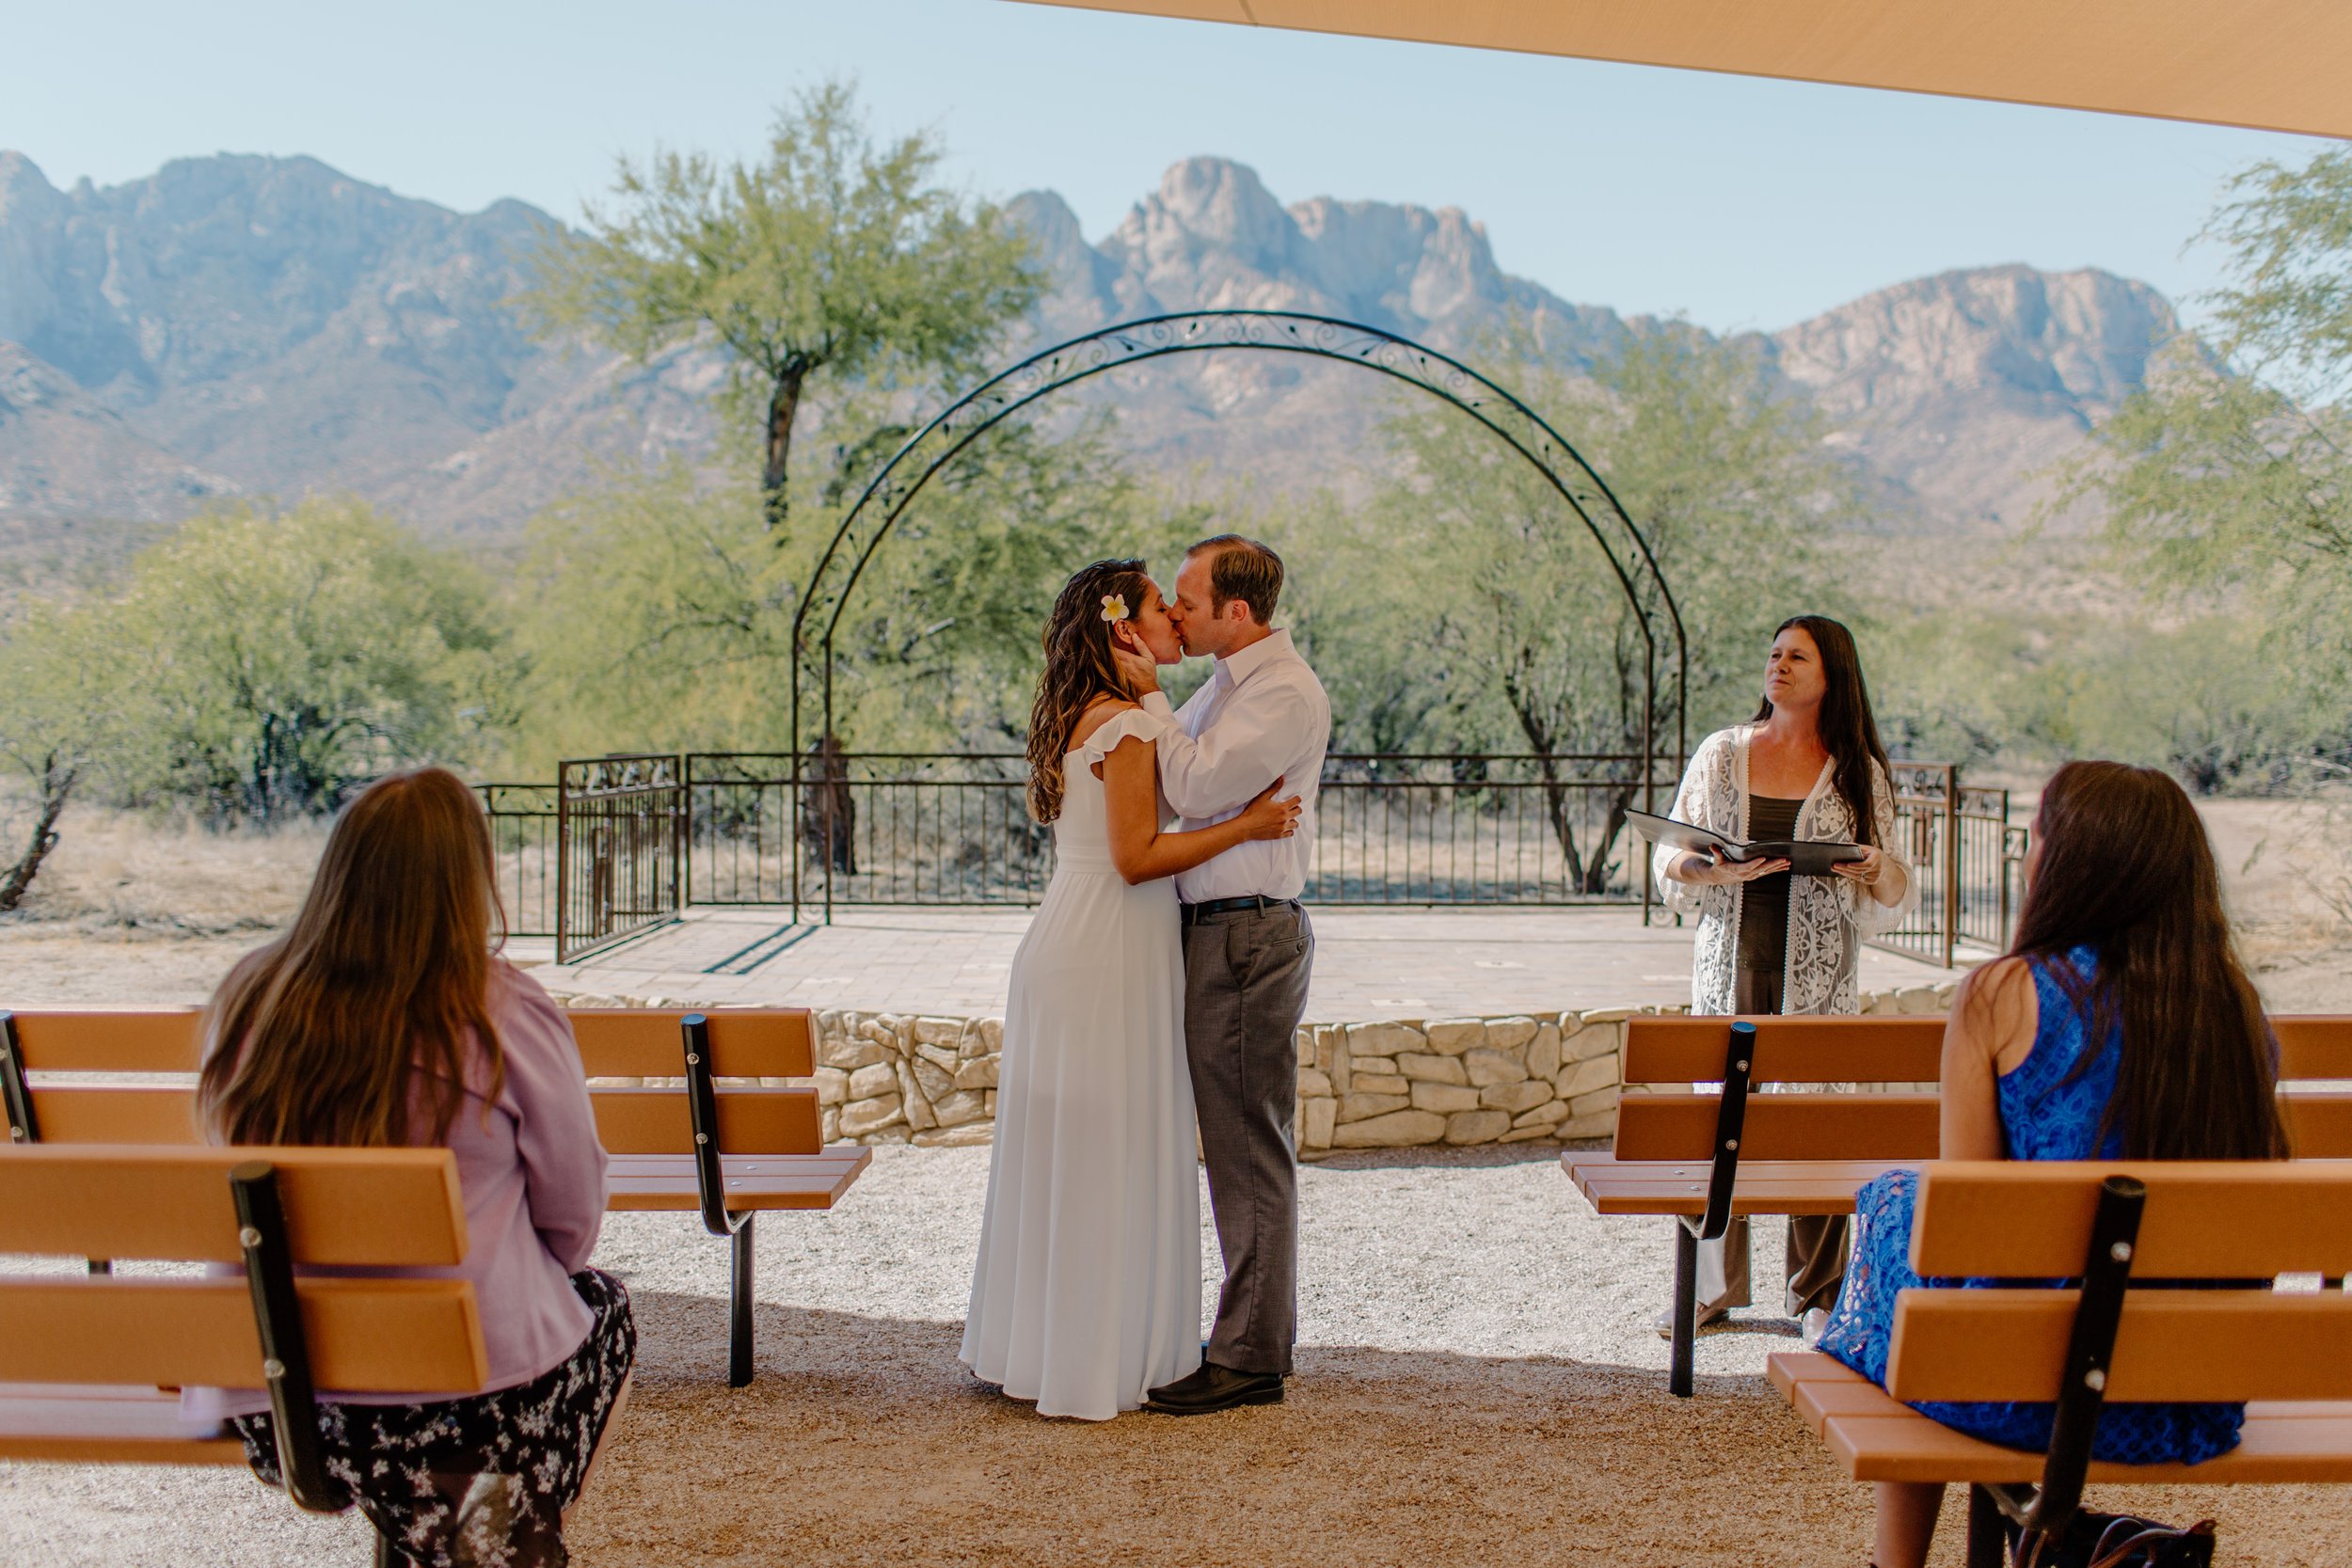  Couple shares their first kiss as a married couple as family watches at Catalina State Park in Tucson Arizona 